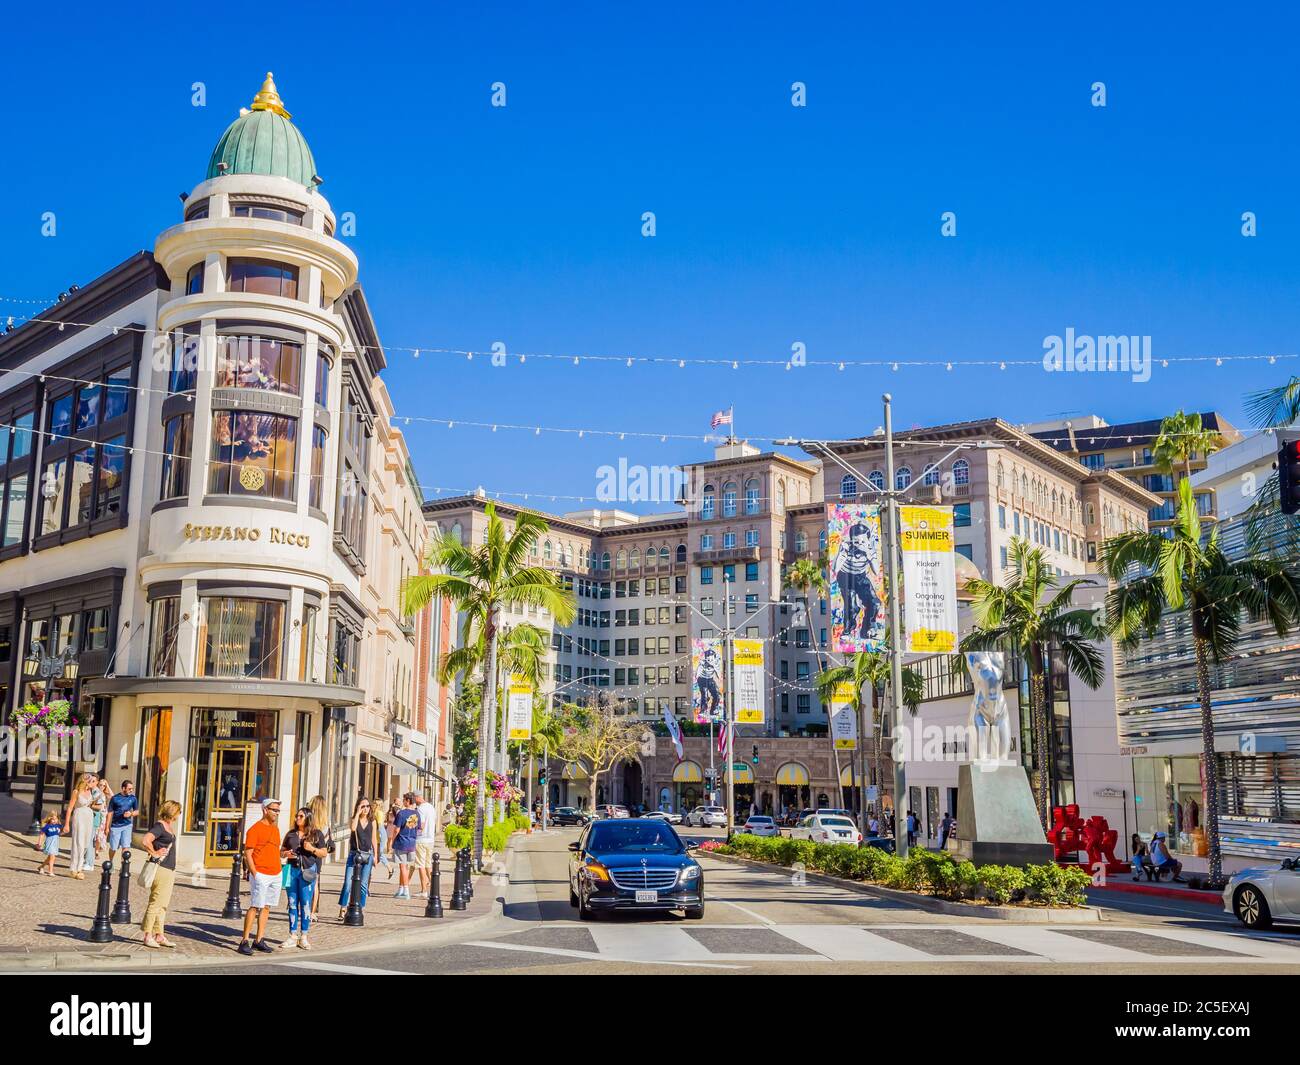 Rodeo drive, Beverly Hills, Los Angeles, California, CA, during